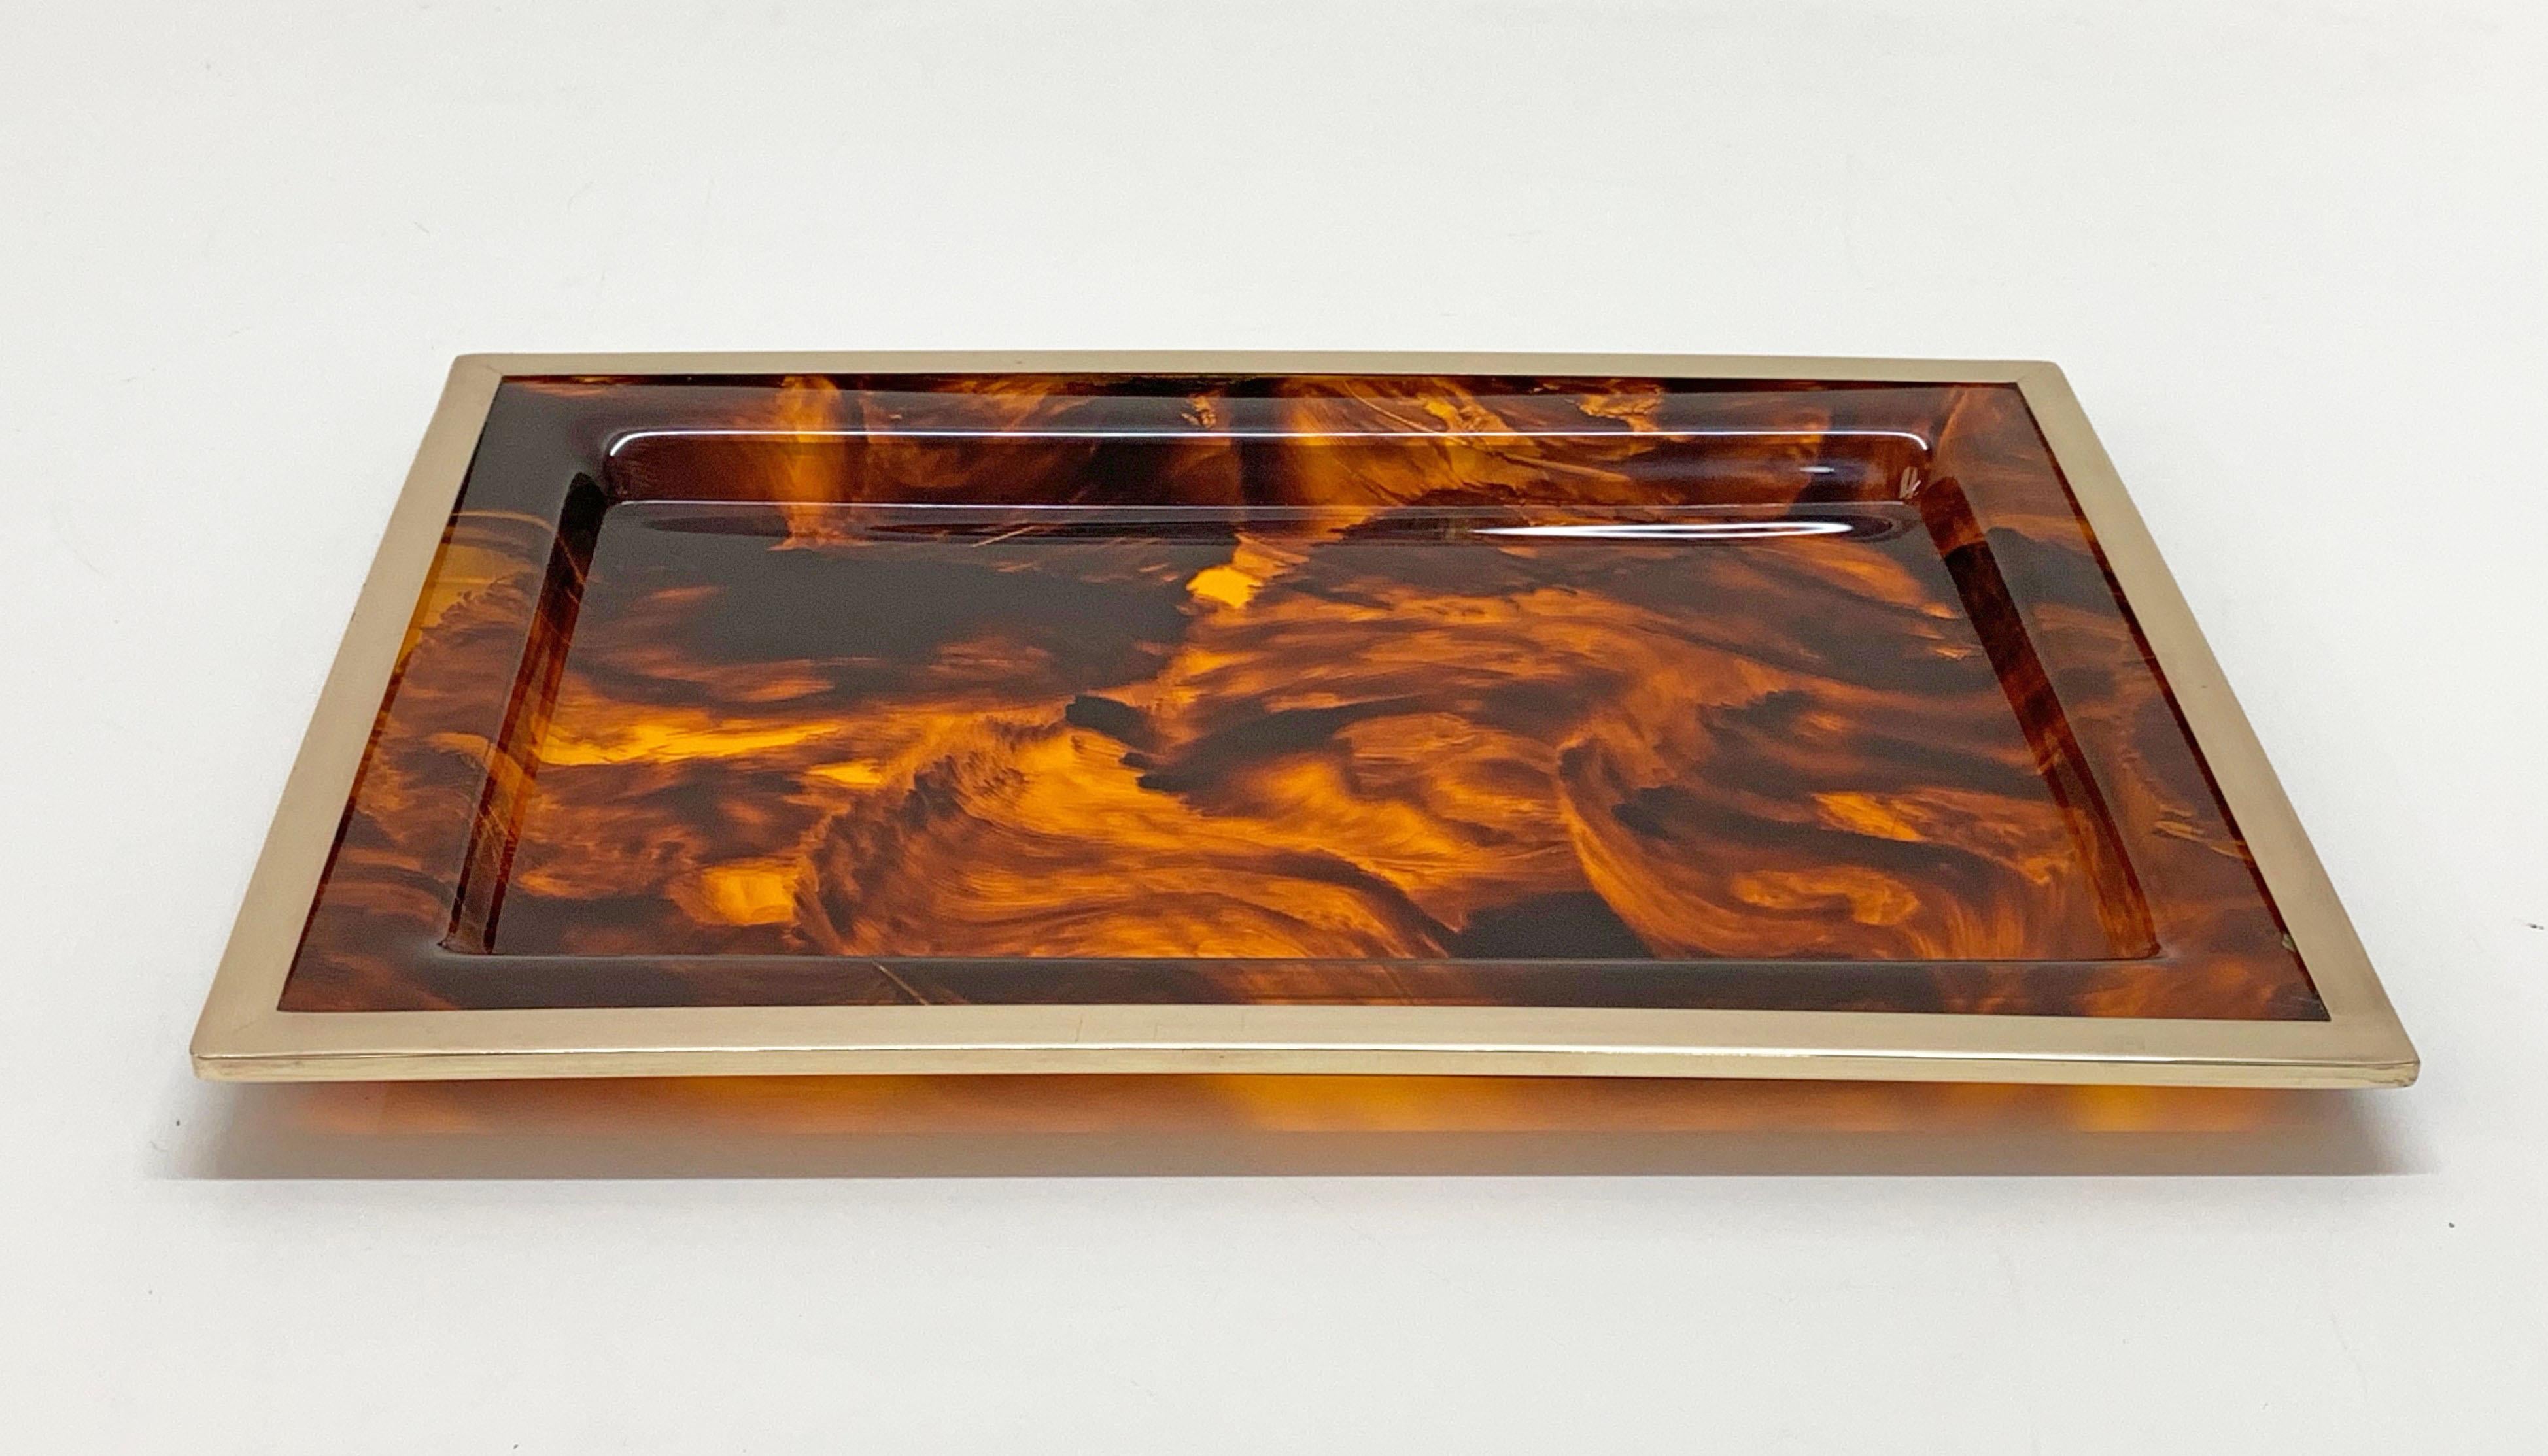 Wonderful midcentury tableware in Lucite and brass. This item was made in Italy during the 1970s and its design is attributed to Willy Rizzo for a Christian Dior production.

It is an iconic squared tortoise-effect Lucite serving tray or plate